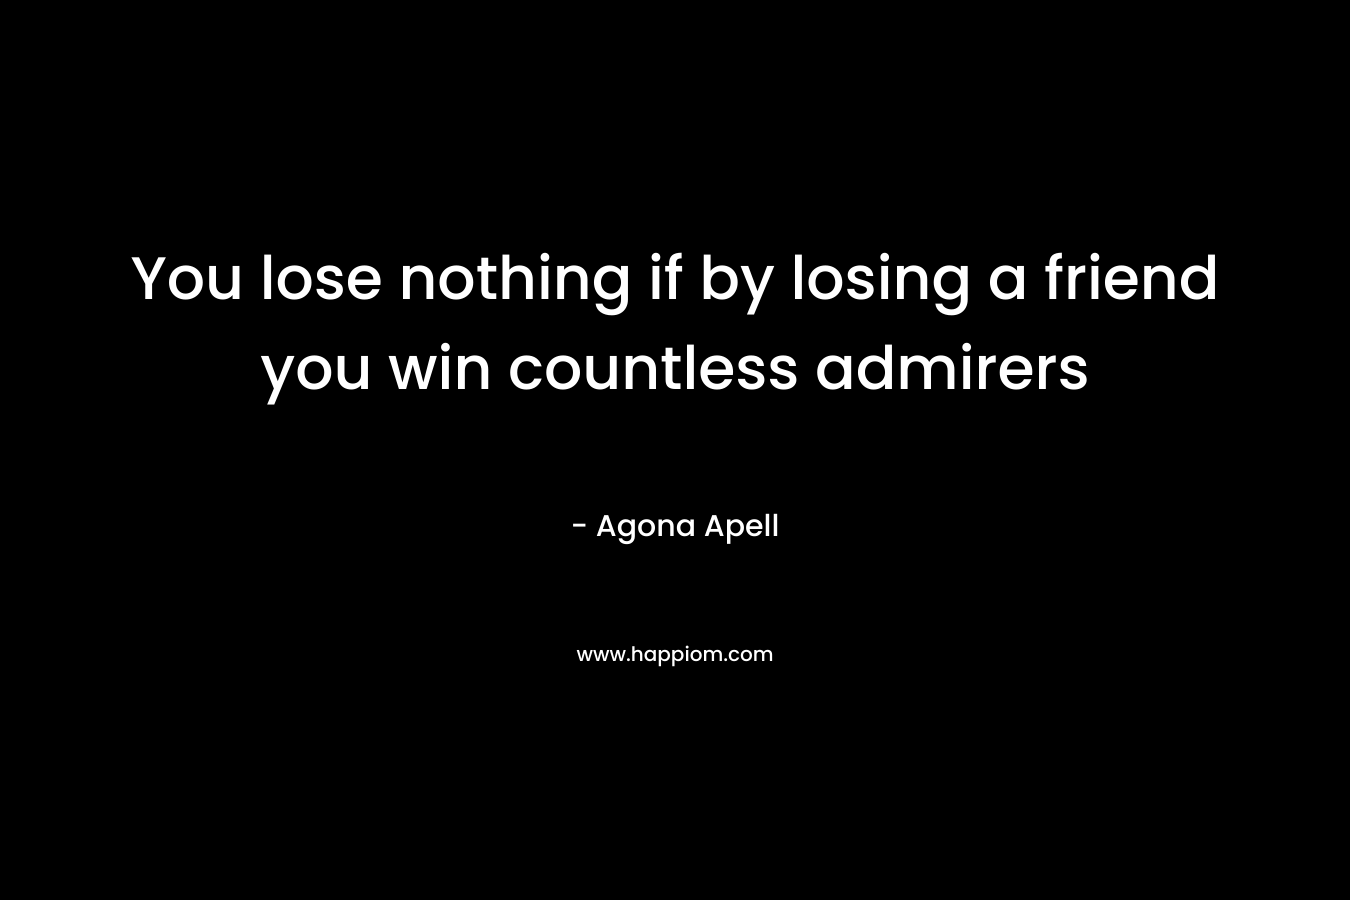 You lose nothing if by losing a friend you win countless admirers – Agona Apell